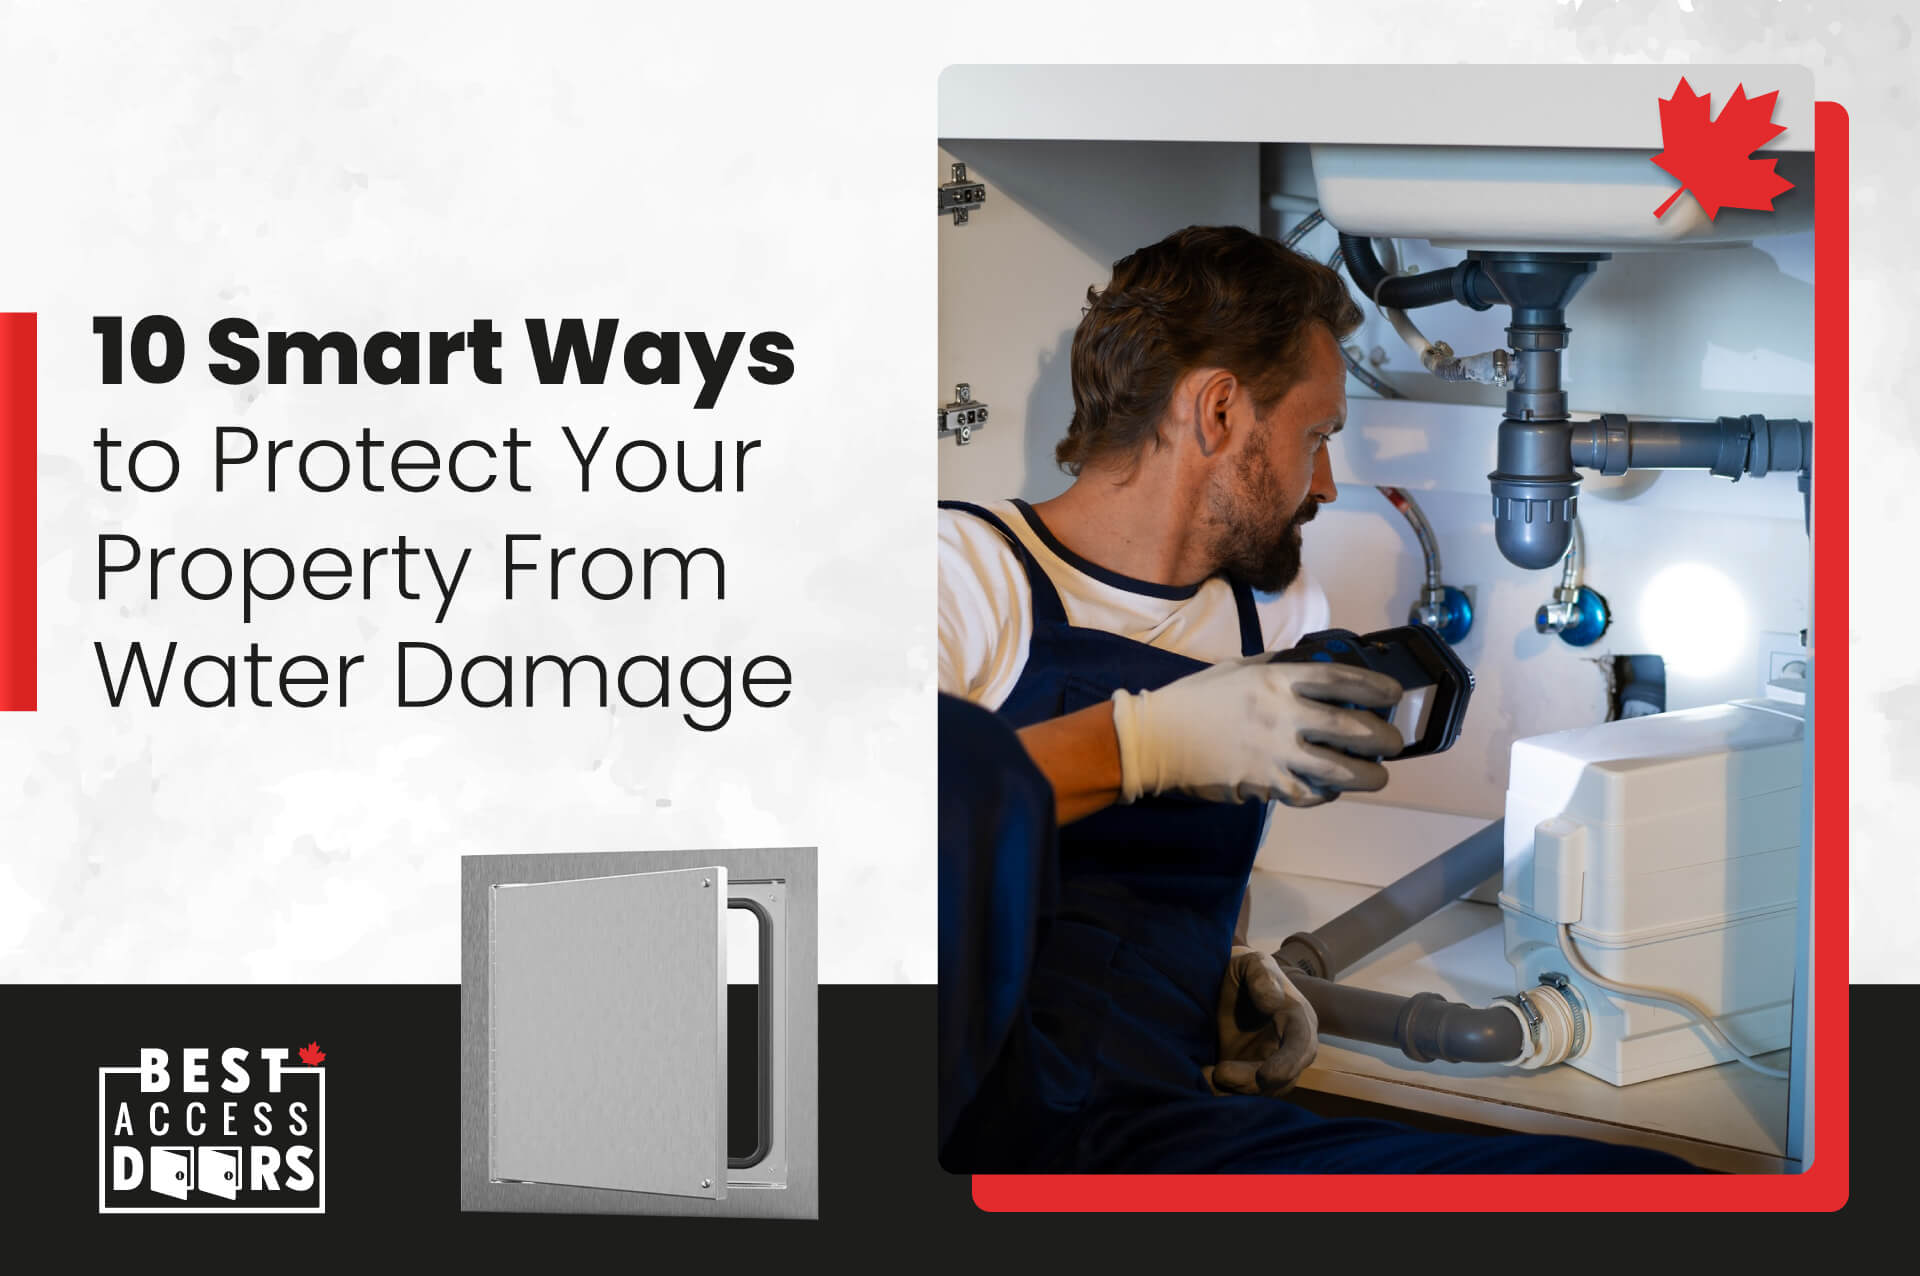 10 Smart Ways to Protect Your Property From Water Damage